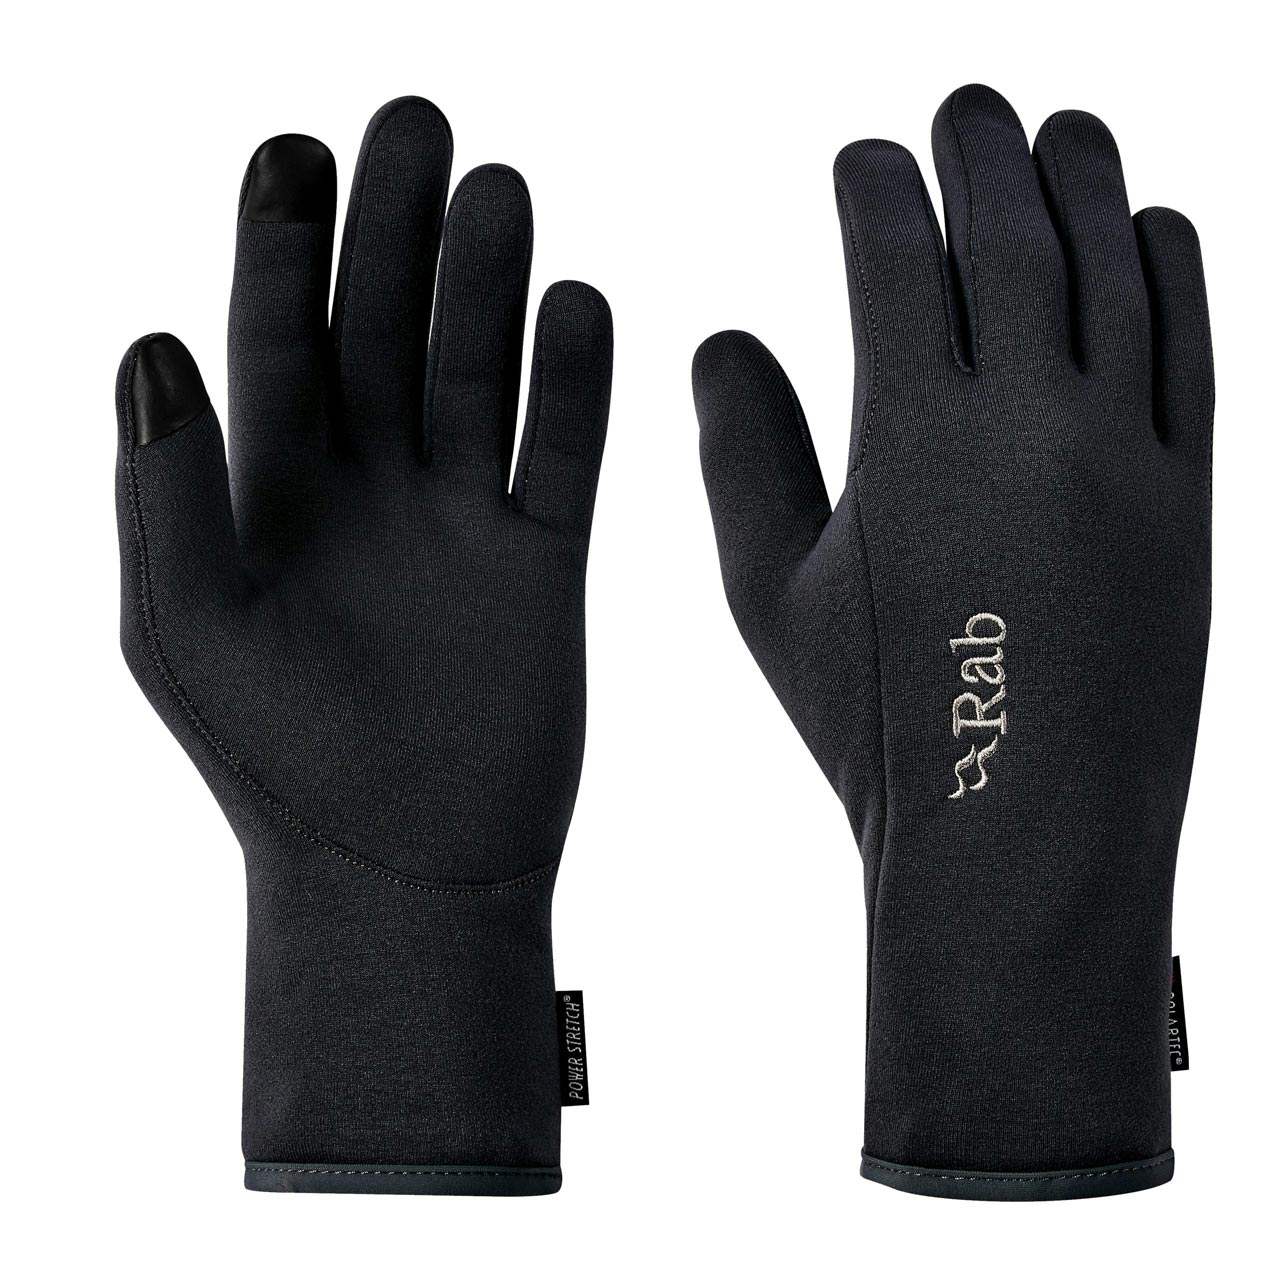 Power Stretch Contact Gloves by RAB - The Luxury Promotional Gifts Company Limited